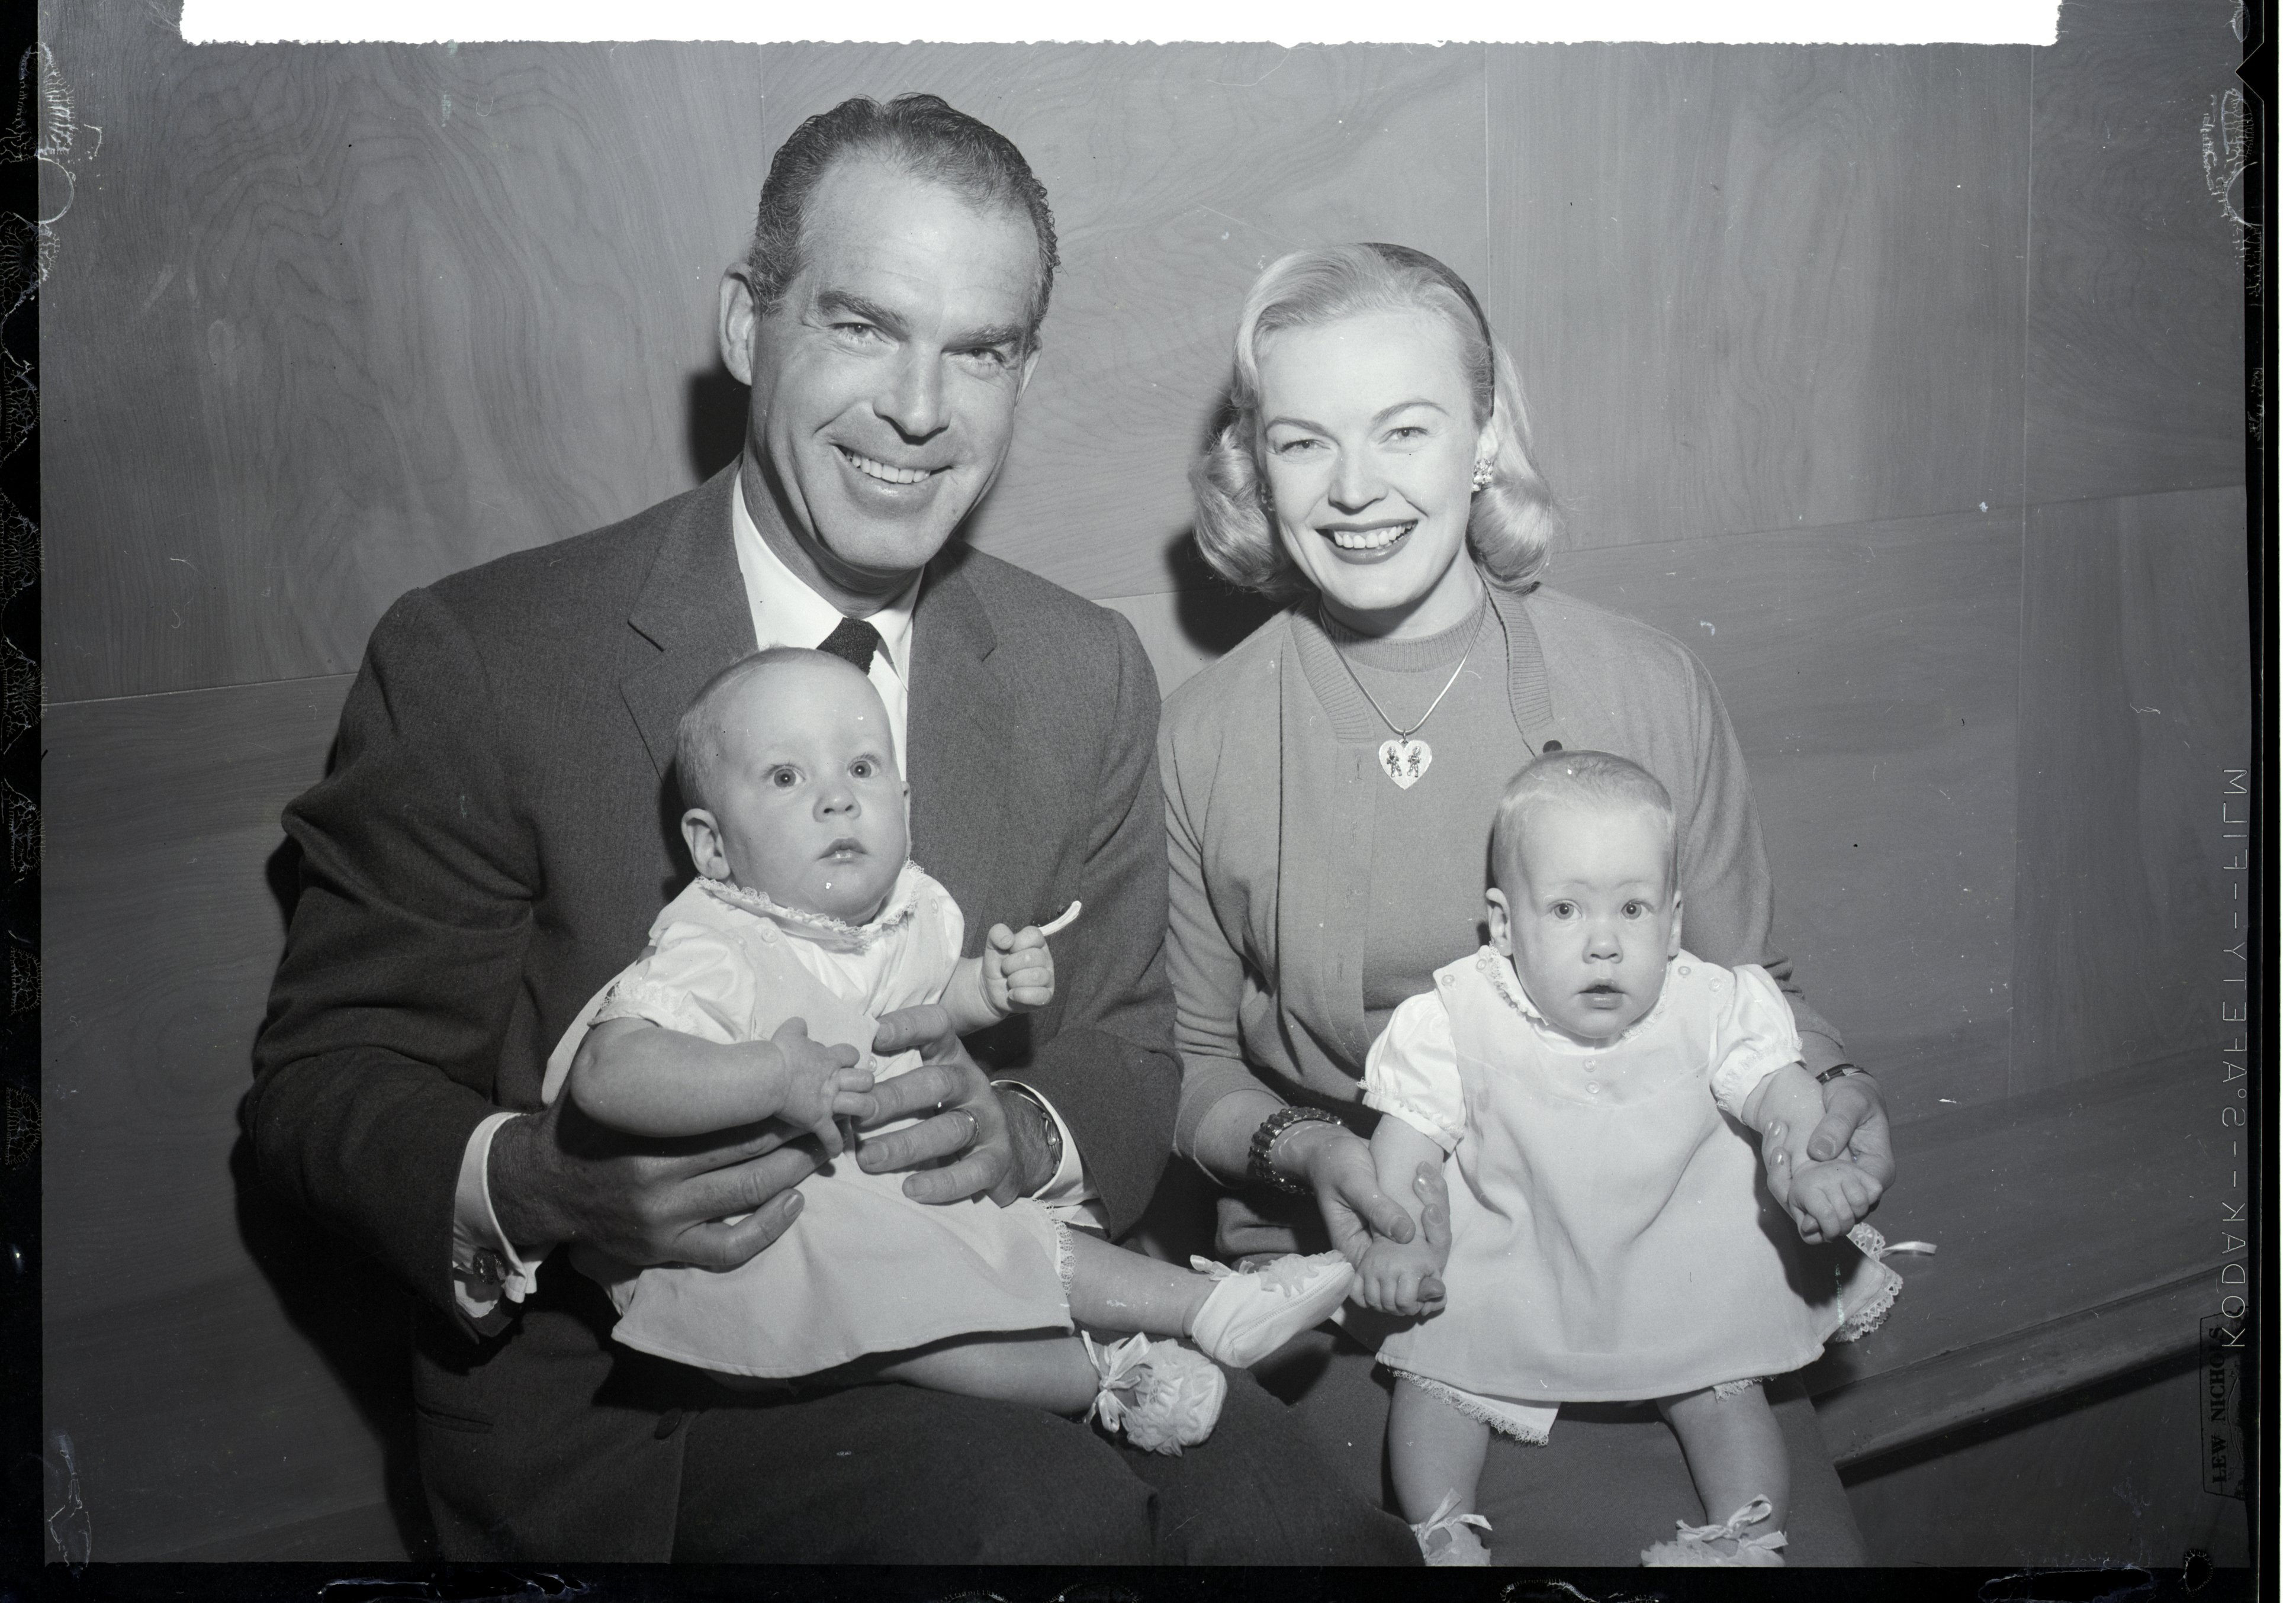 Fred MacMurray and his actress-wife, June Haver, received a real Christmas present on December 4 when the court approved their adoption of seven-month-old twin girls. | Source: Getty Images